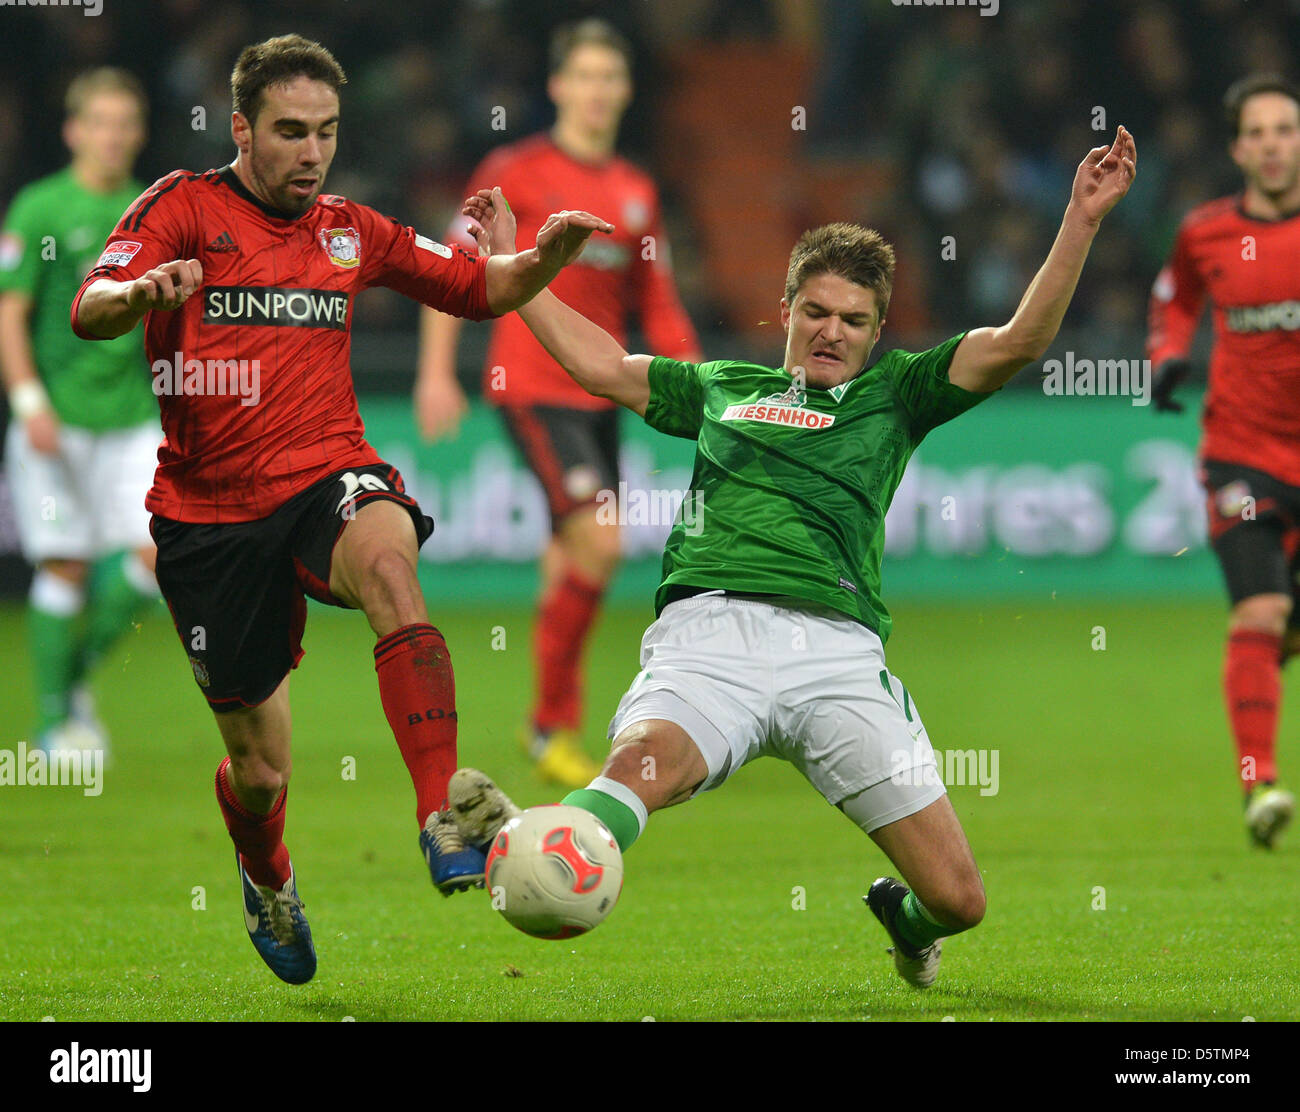 Werder's Aleksandar Ignjowski (L) vies for the ball with Leverkusen's Daniel Carvajal during the German Bundesliga soccer match between Werder Bremen and Bayer Leverkusen at Weser Stadium in Bremen, Germany, 28 November 2012. Photo: CARMEN JASPERSEN  (ATTENTION: EMBARGO CONDITIONS! The DFL permits the further utilisation of up to 15 pictures only (no sequntial pictures or video-sim Stock Photo